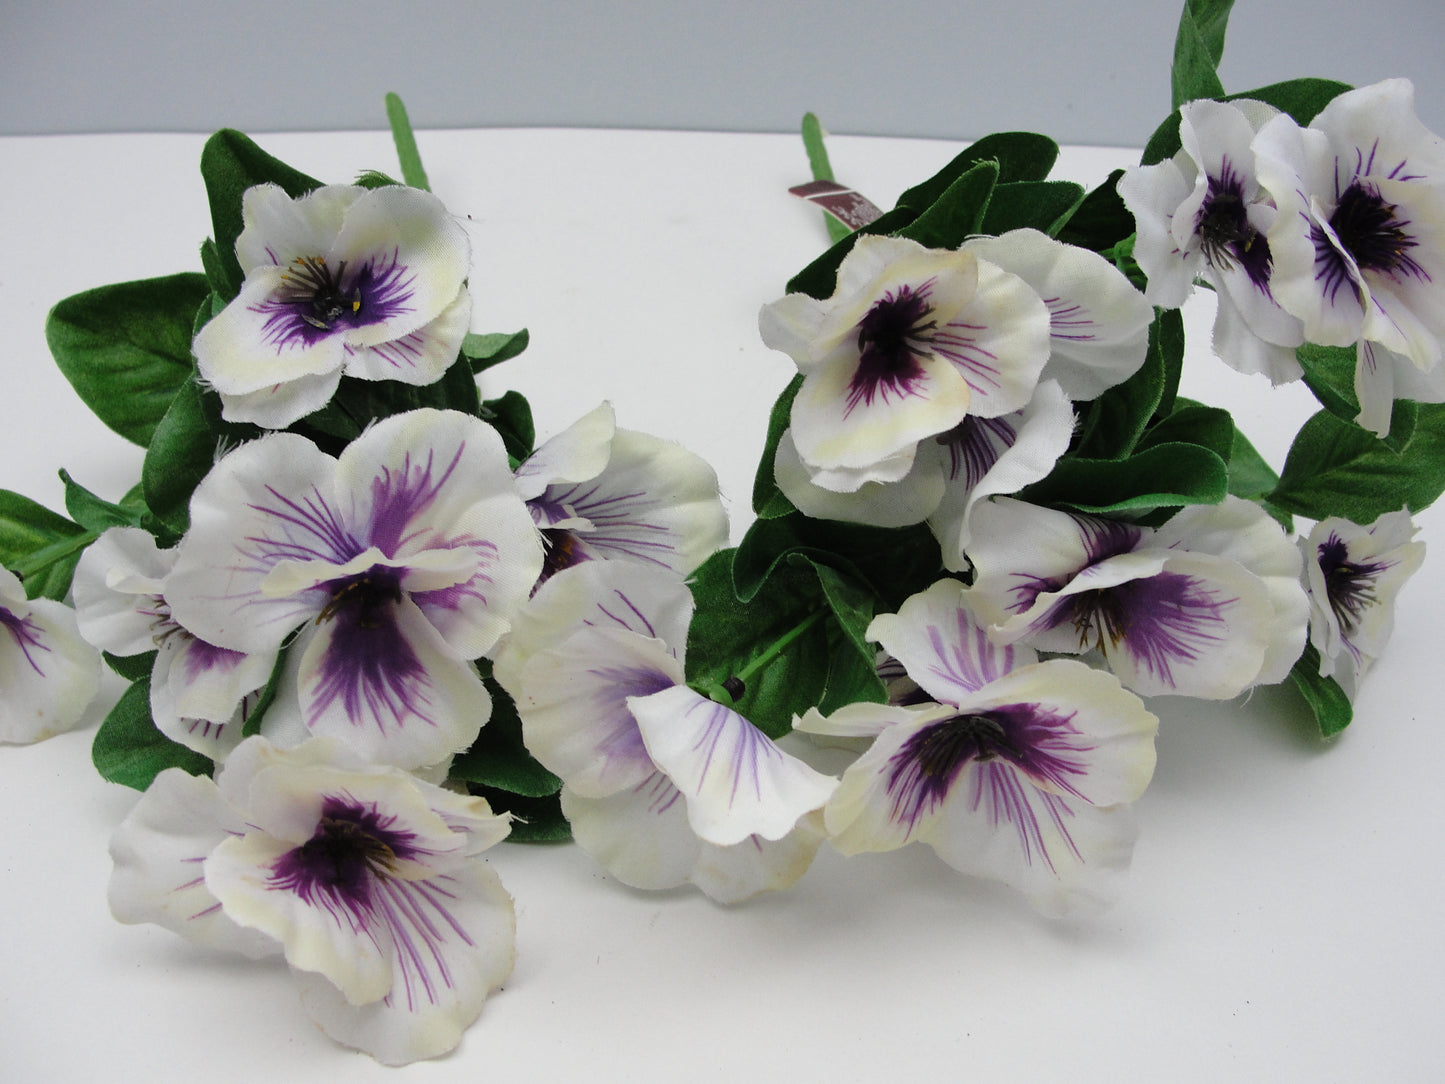 Pansy bush 7 stems floral supplies - Floral Supplies - Craft Supply House